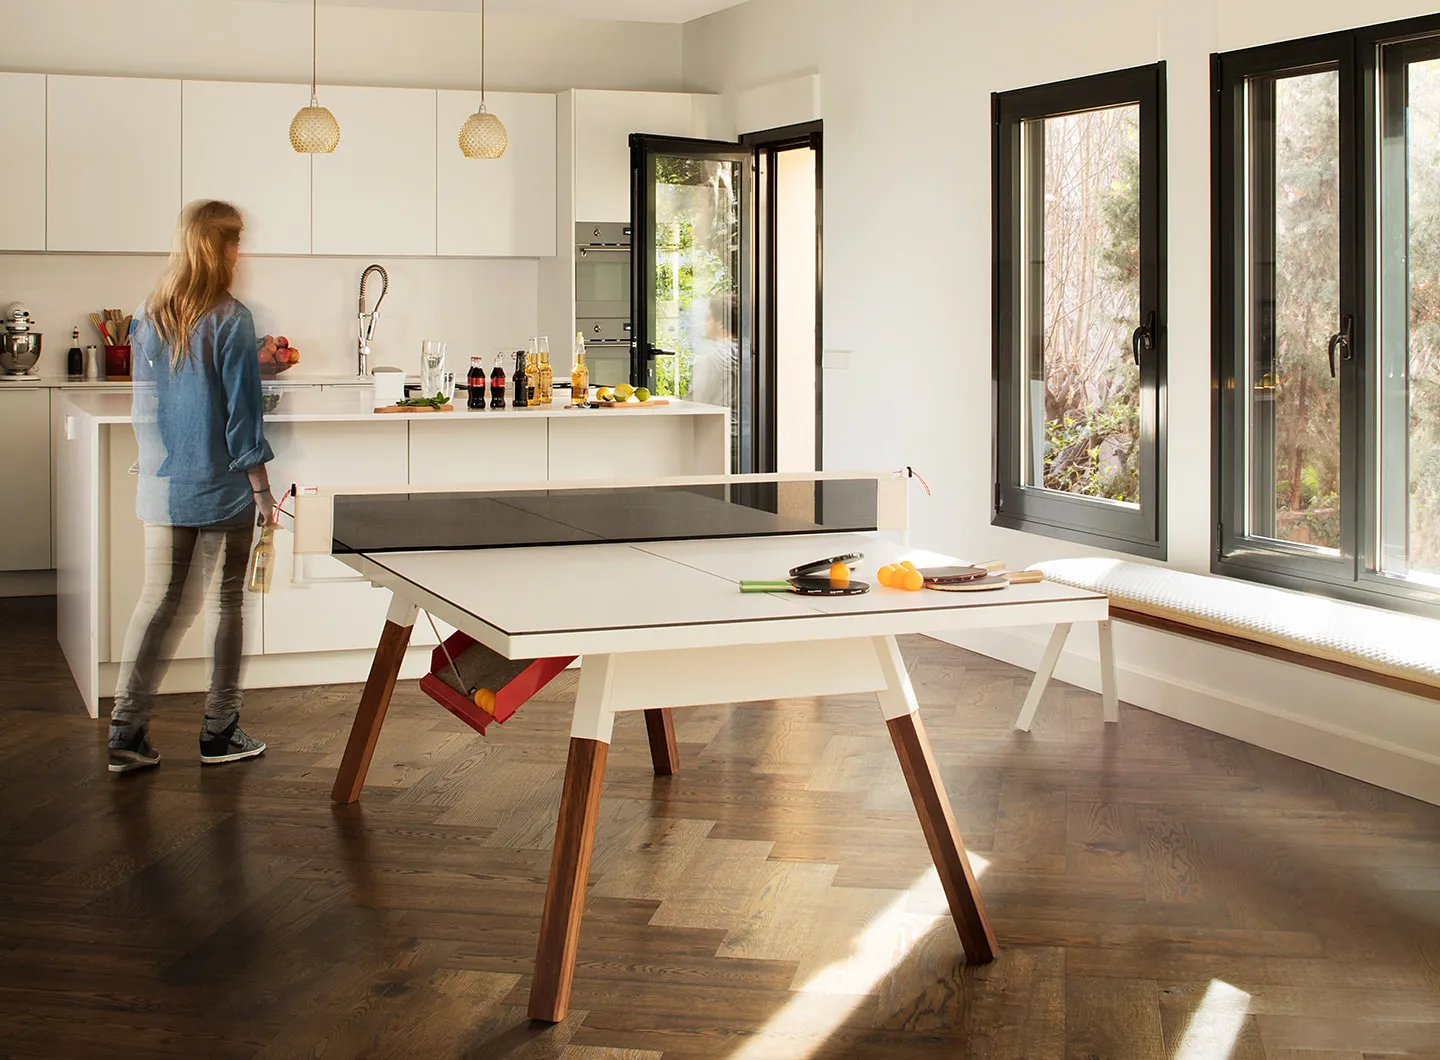 You and Me ping pong table | Salone del Mobile